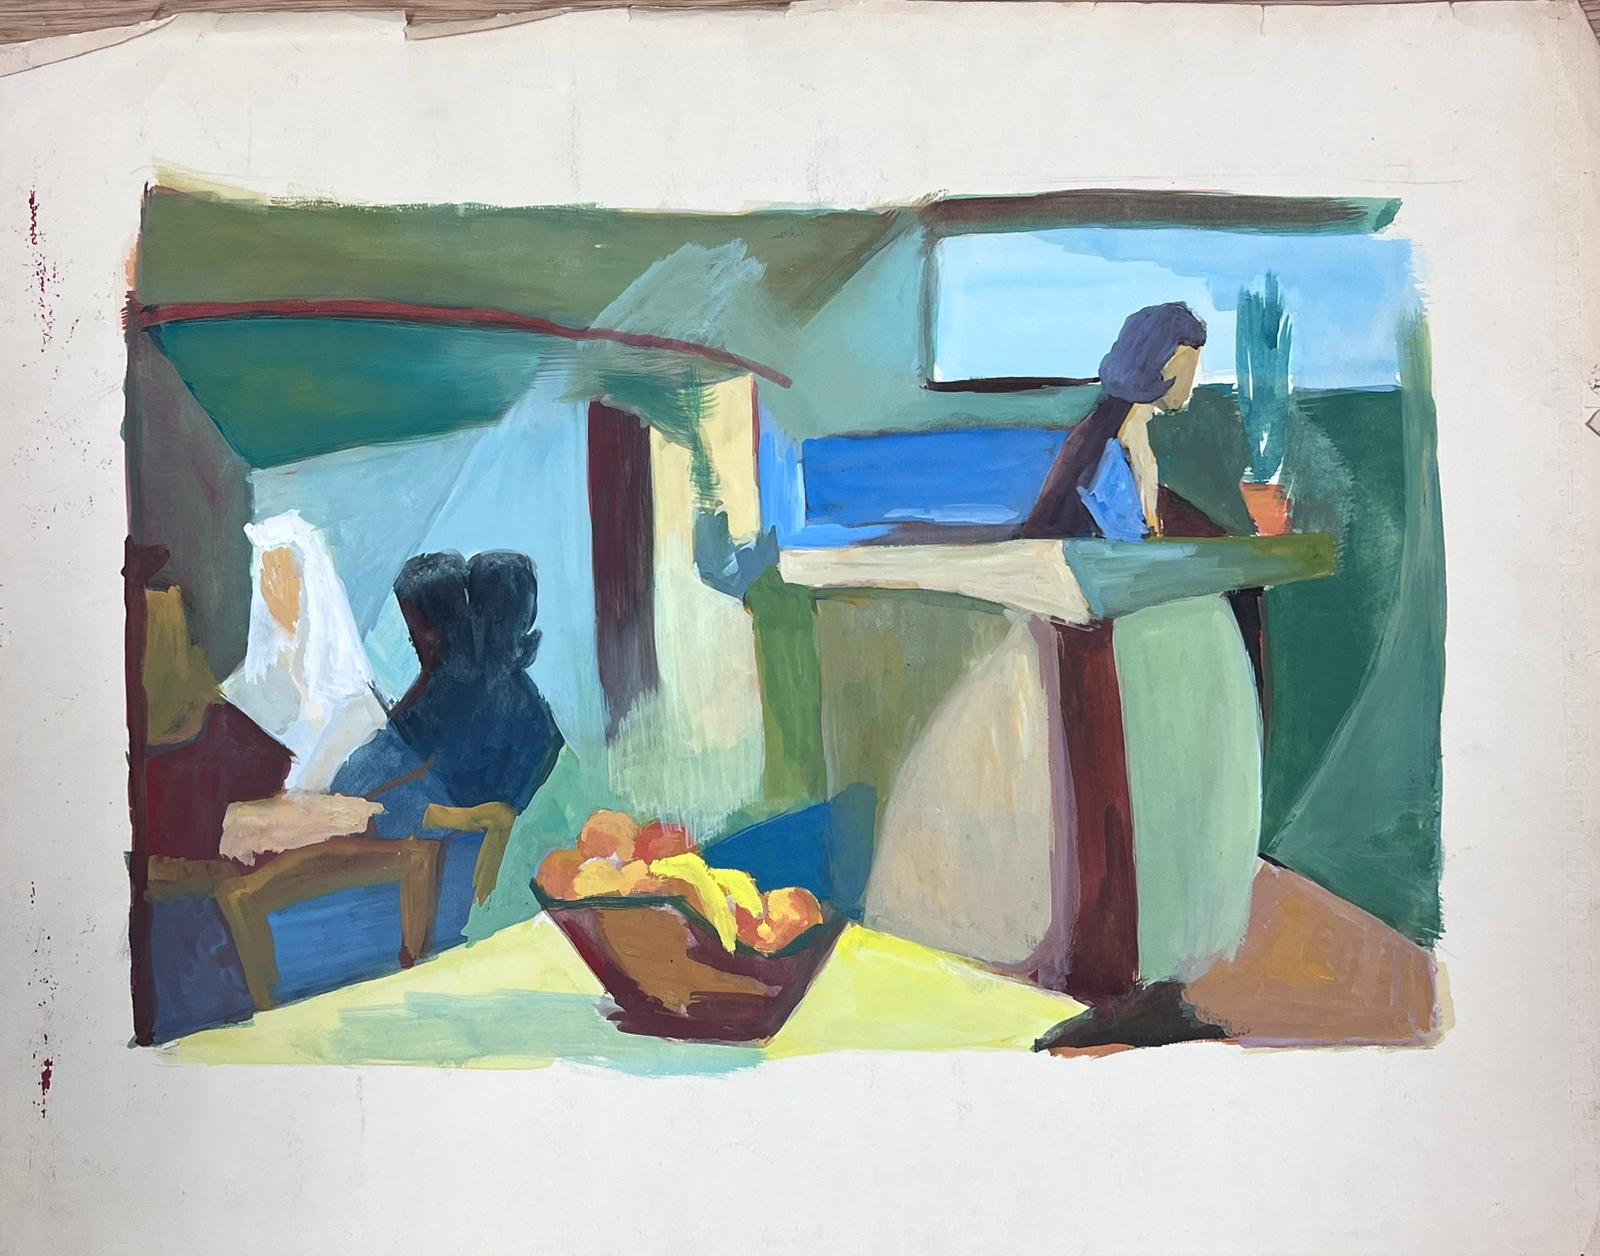 20th Century French Cubist Modernist Interior Cafe Scene with Figures - Painting by Guy Nicod